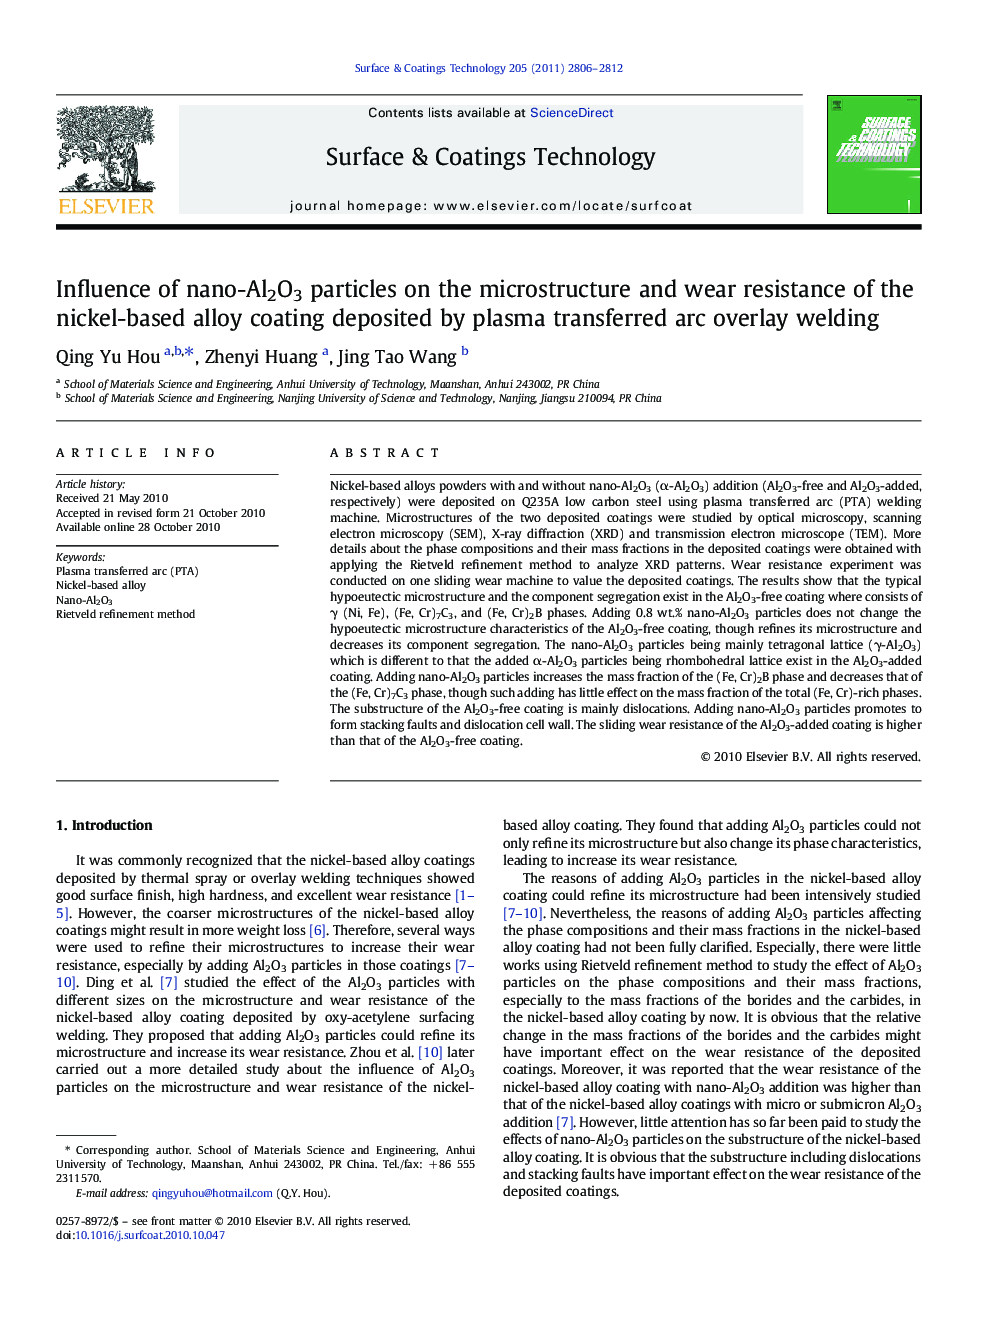 Influence of nano-Al2O3 particles on the microstructure and wear resistance of the nickel-based alloy coating deposited by plasma transferred arc overlay welding